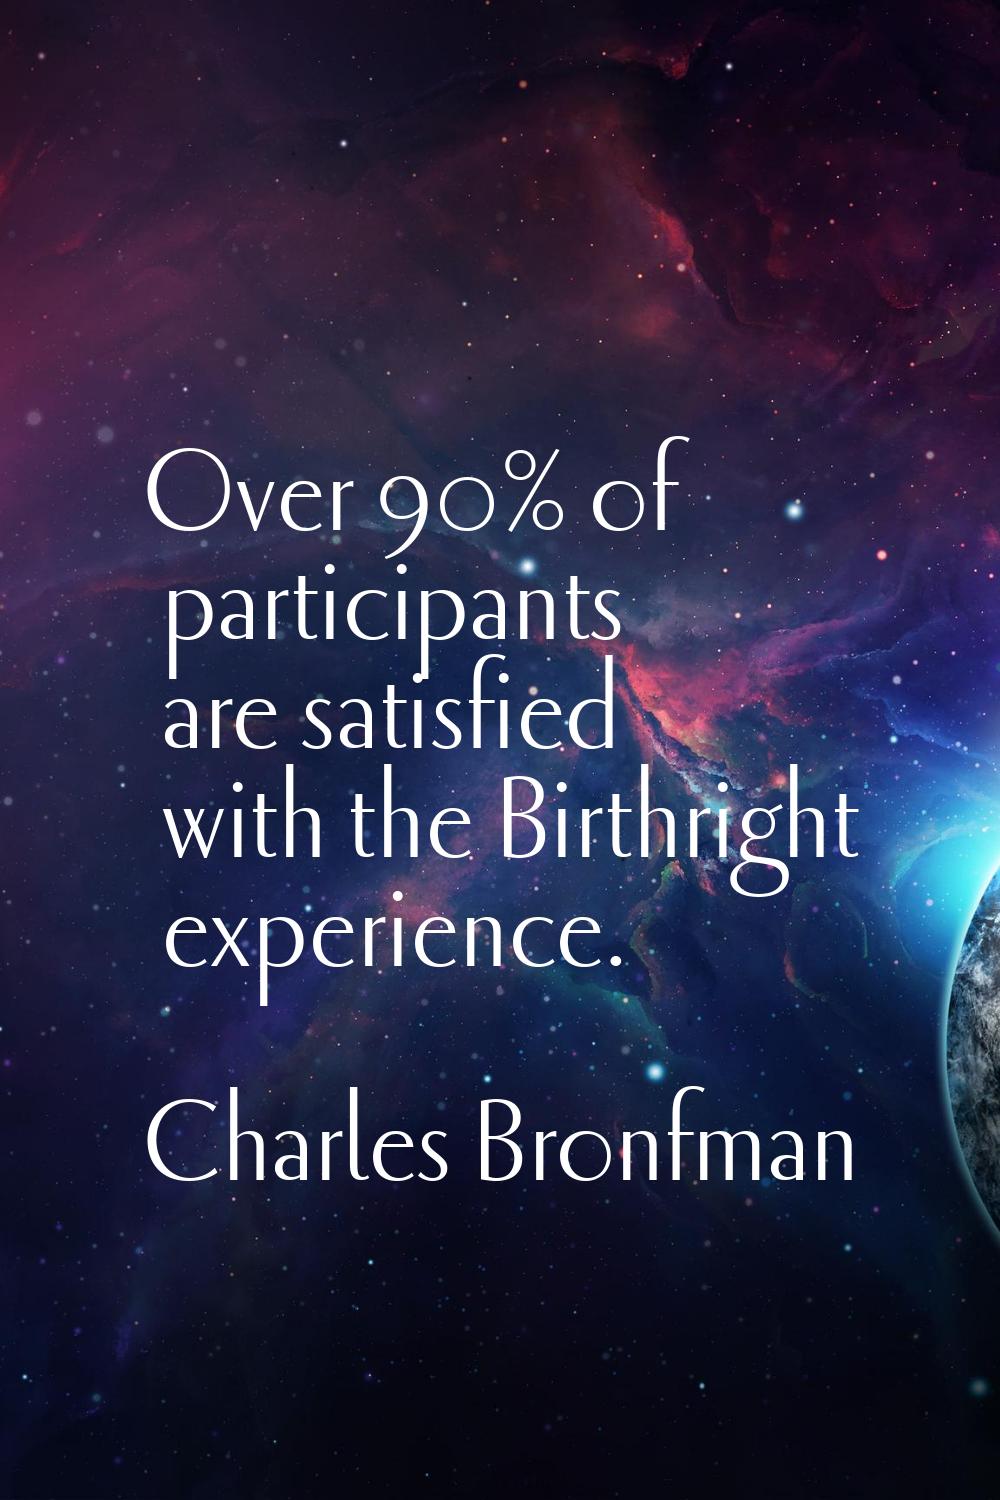 Over 90% of participants are satisfied with the Birthright experience.